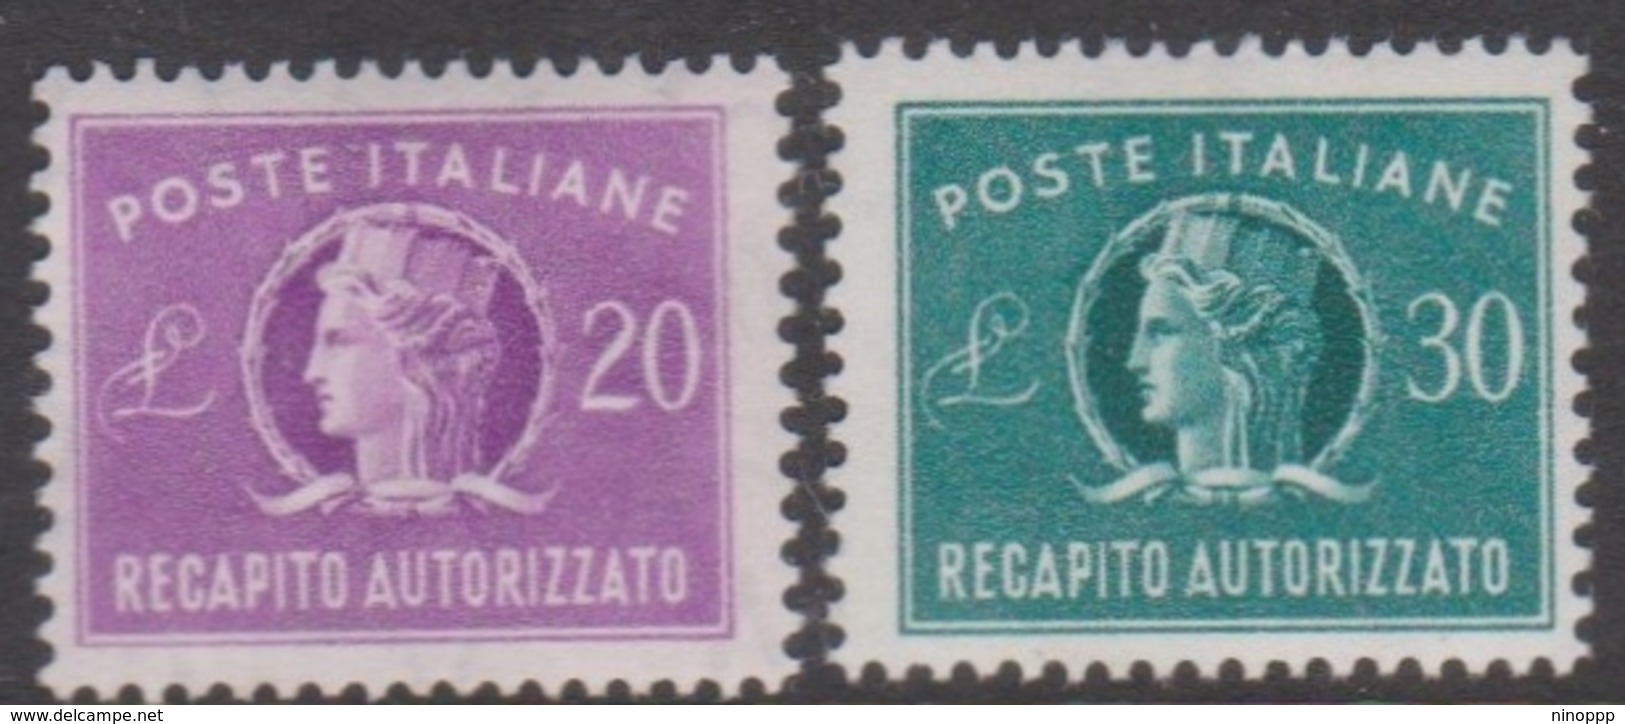 Italy AD 12-13 1955 Authorized Delivery Stamps, Mint Hinged - 1946-60: Mint/hinged